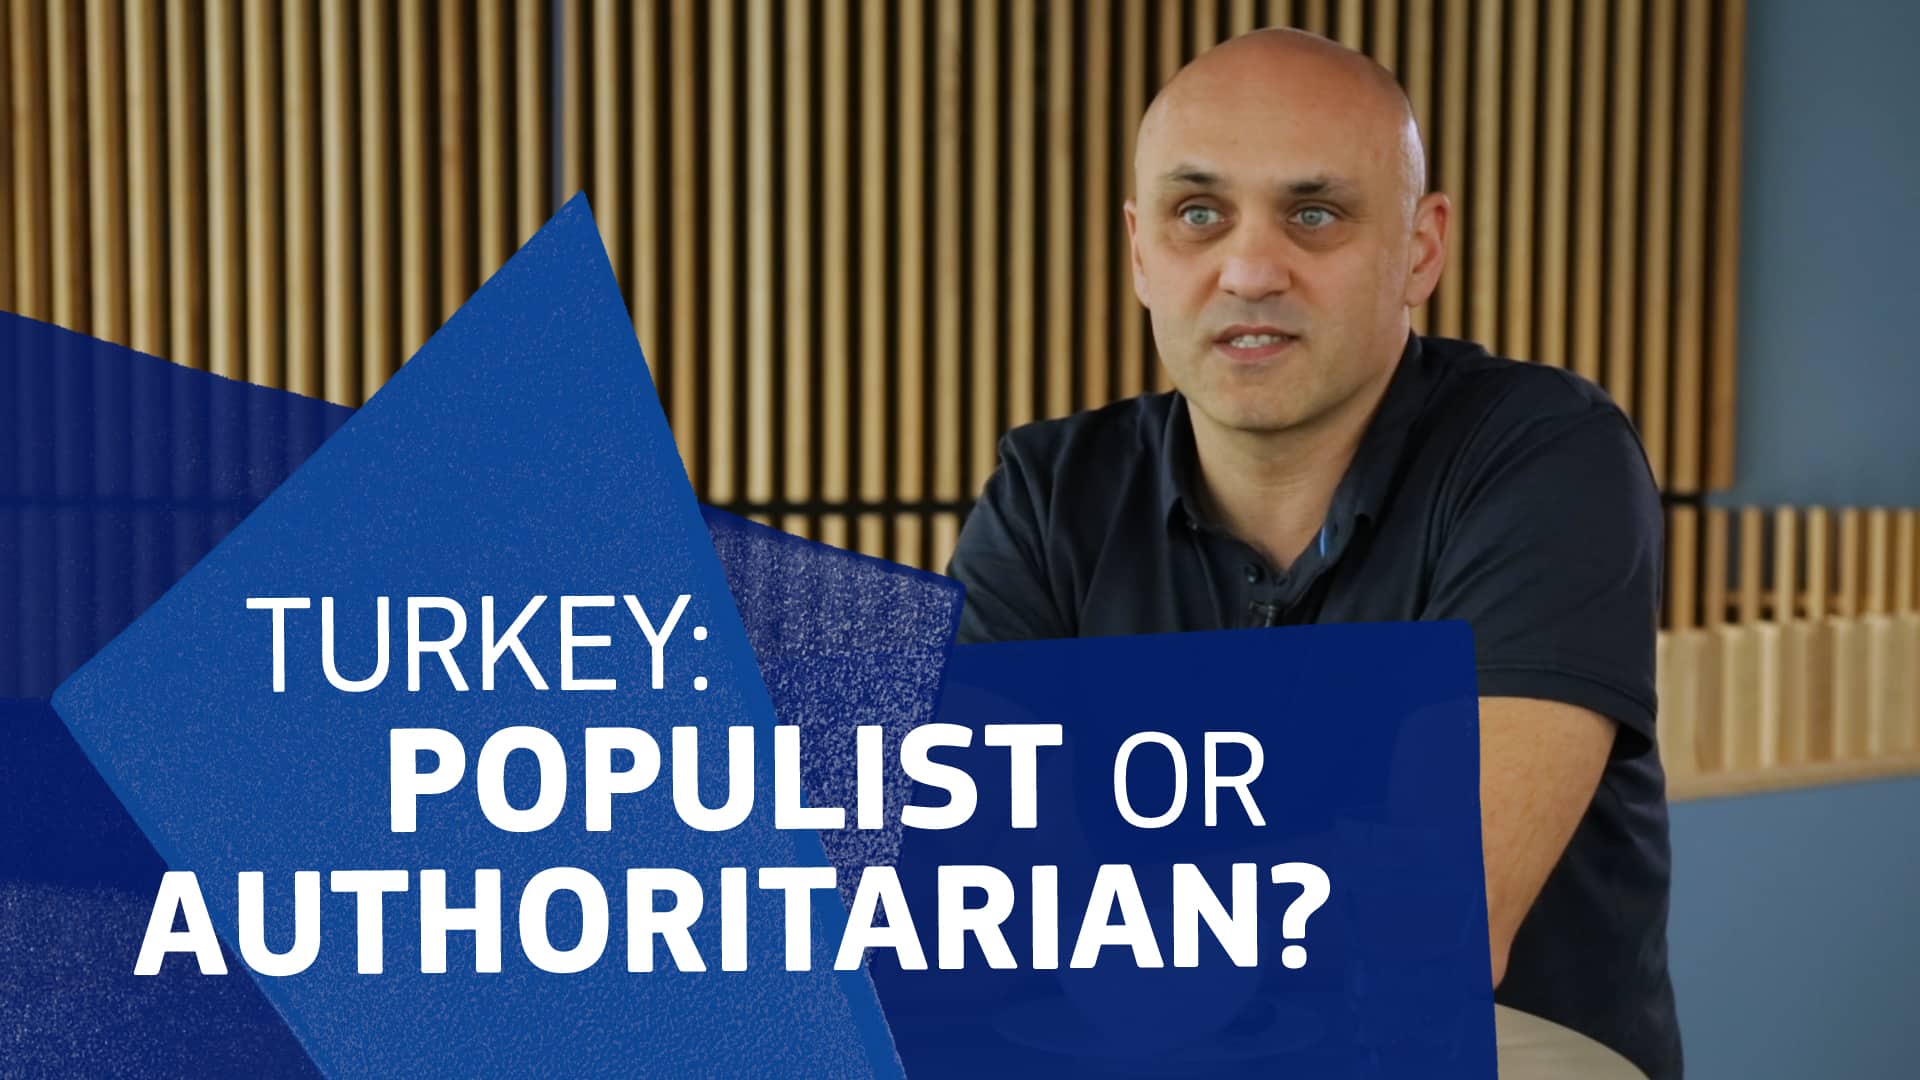 Ertuğ Tombuş speaking with text overlay 'Populist or Authoritarian?'